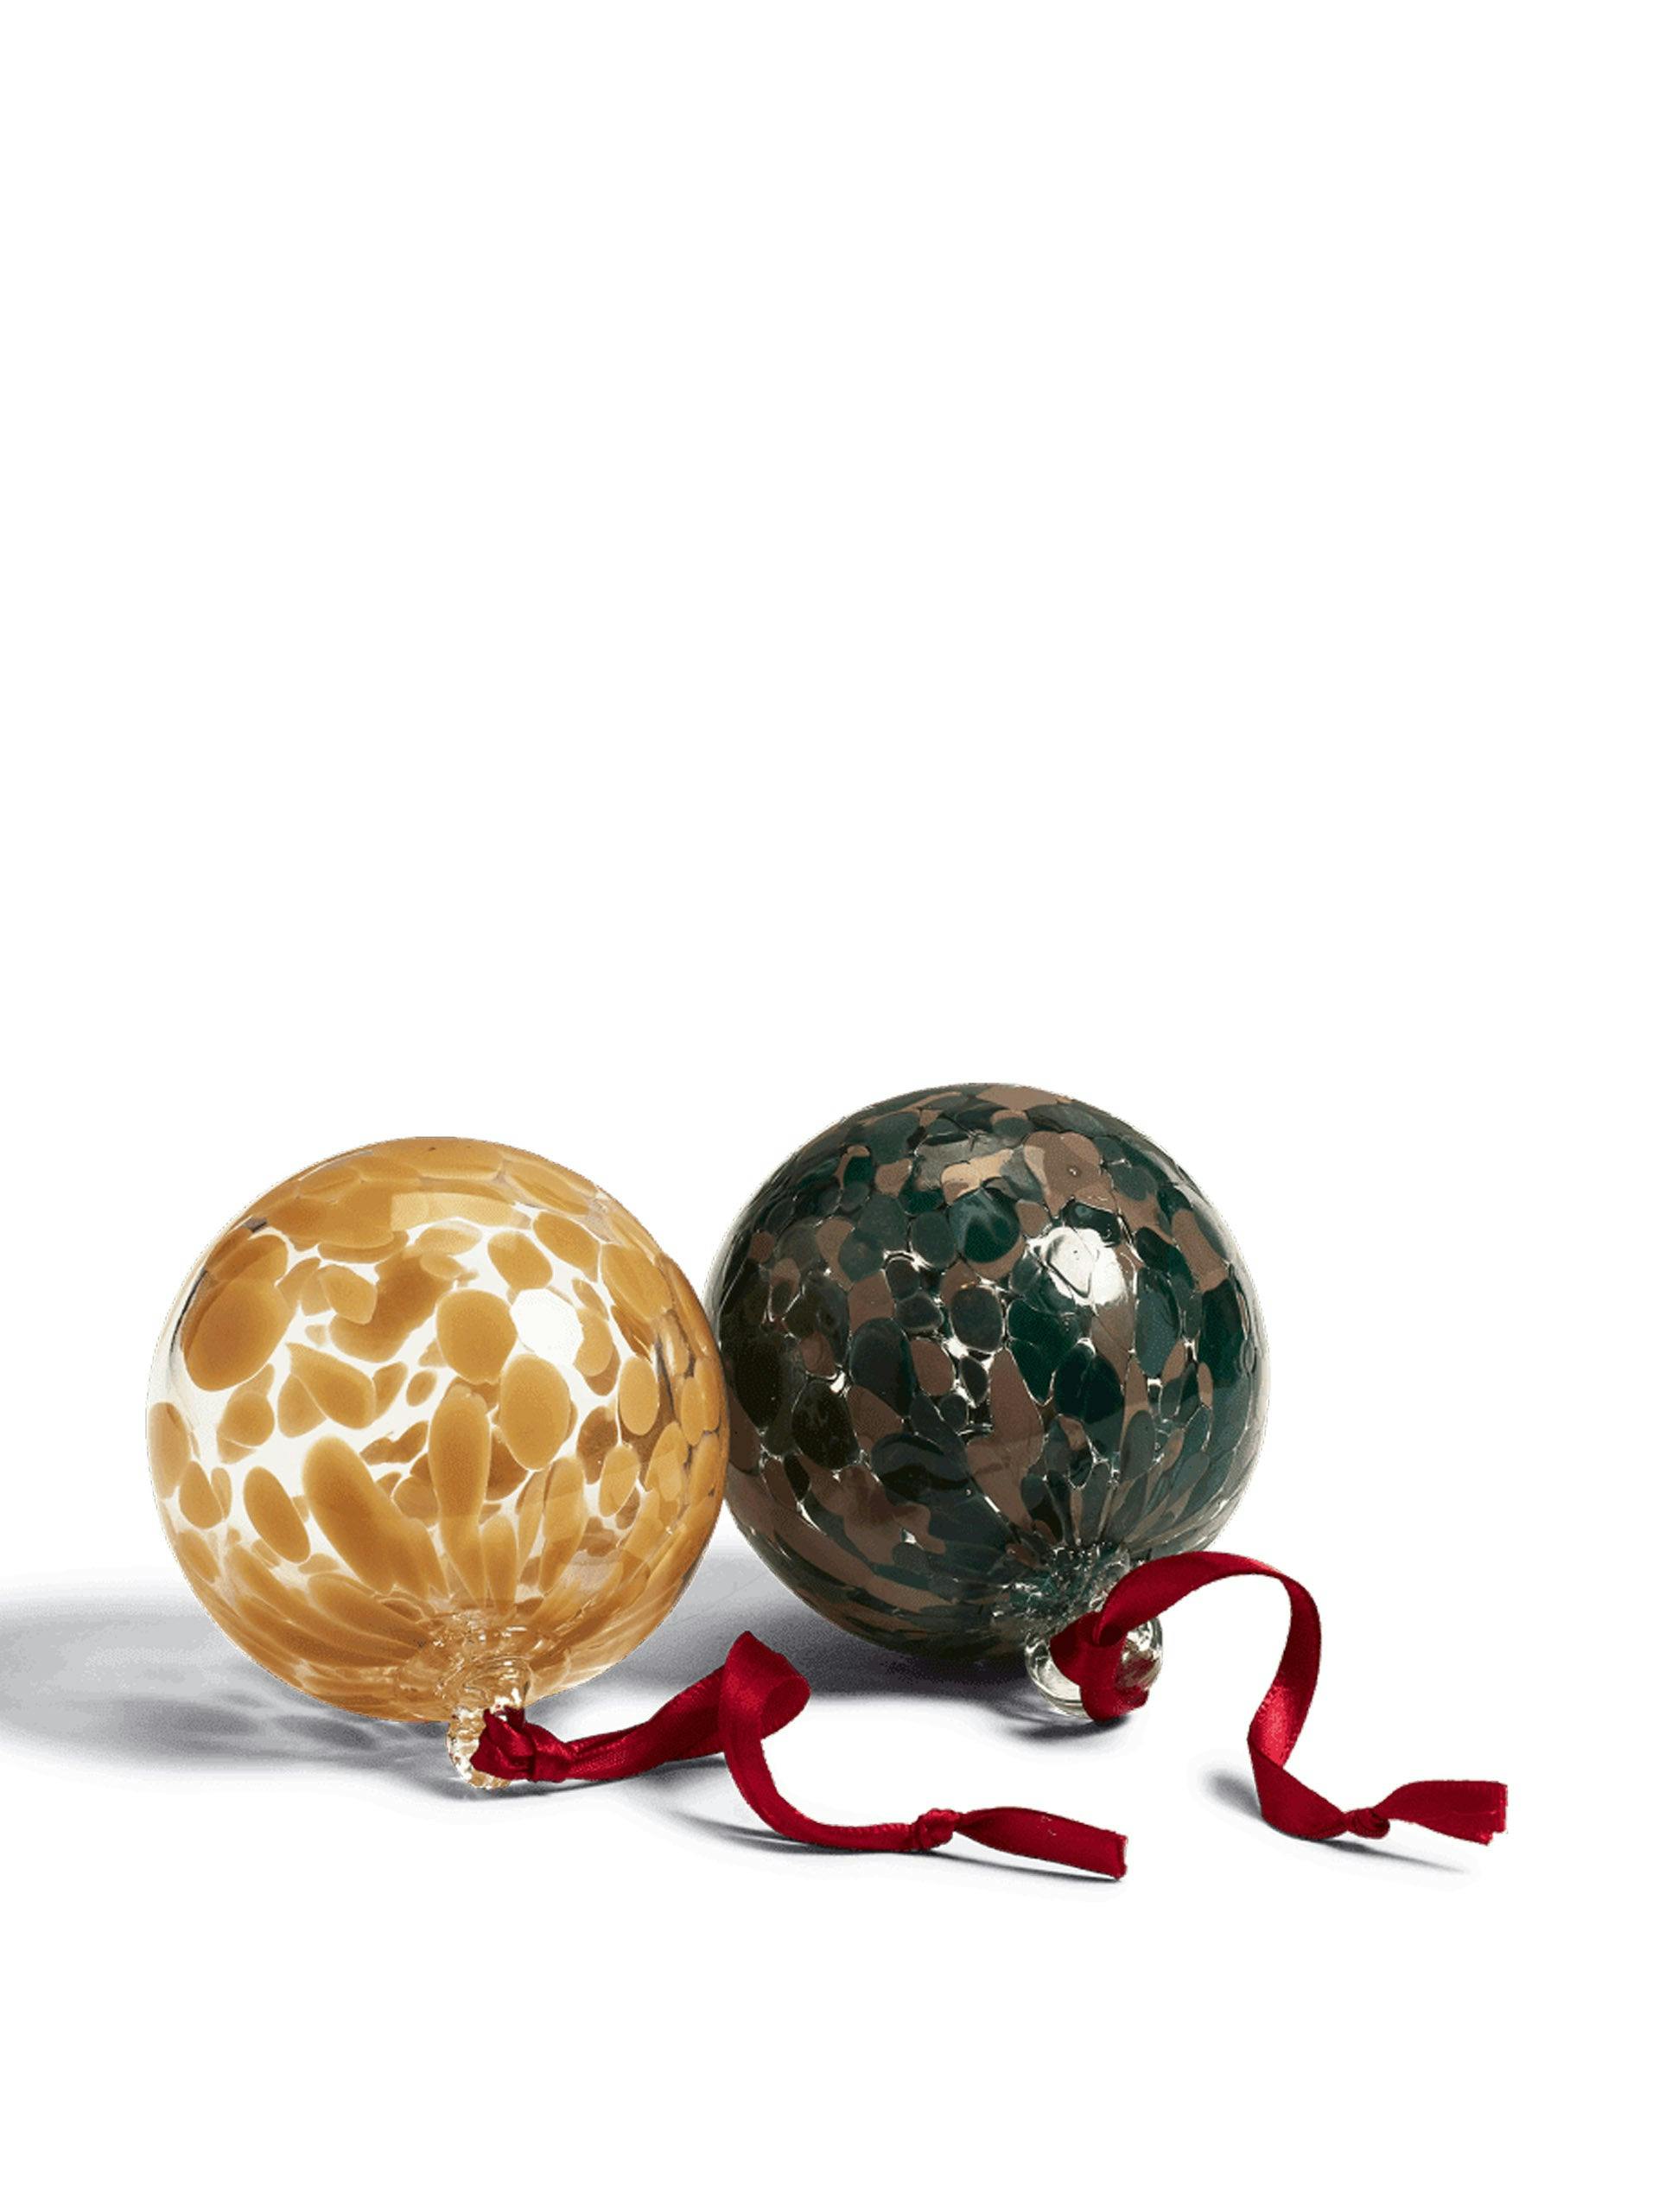 Sumi glass yellow and green bauble tree decorations (set of 2)